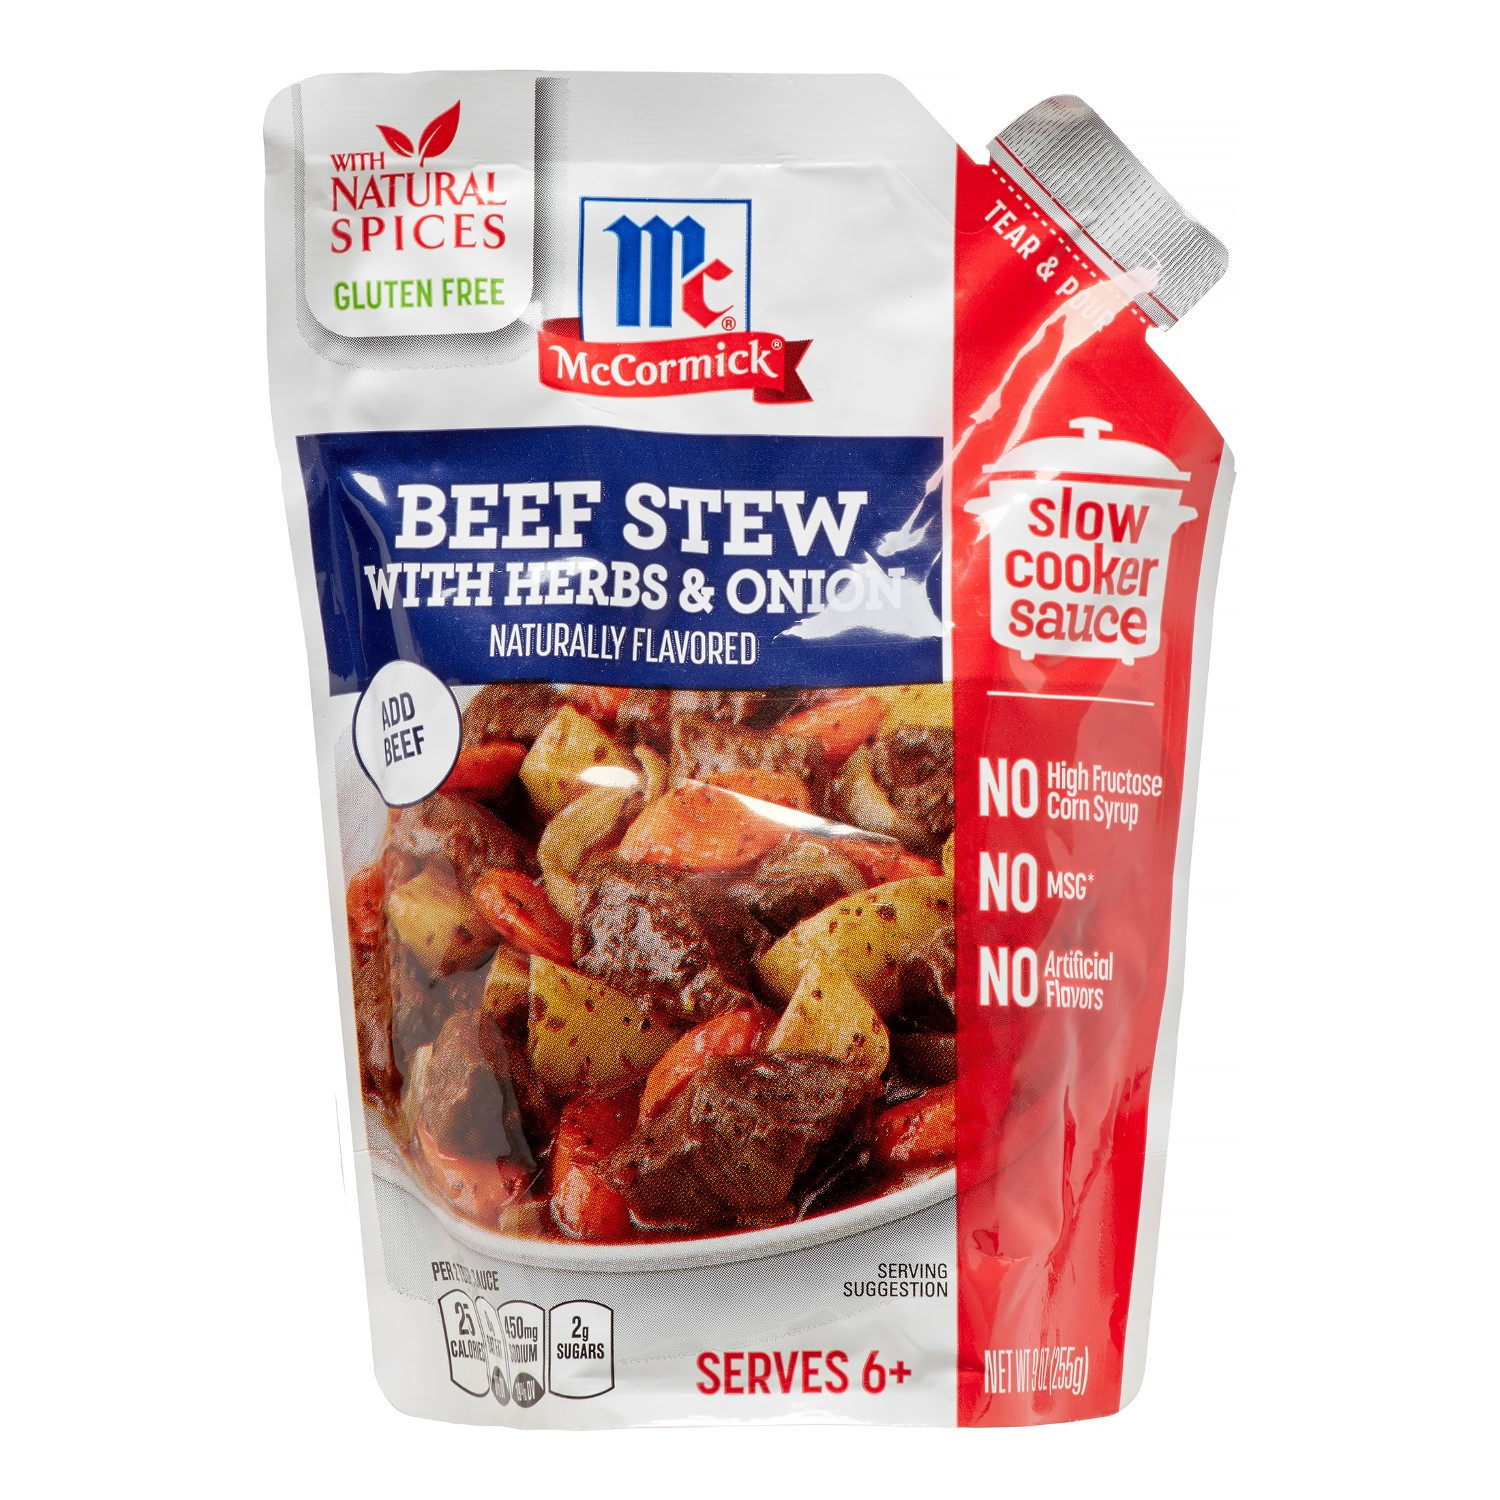 Mccormick Beef Stew
 McCormick Slow Cookers Beef Stew With Herbs & ions 9 Oz